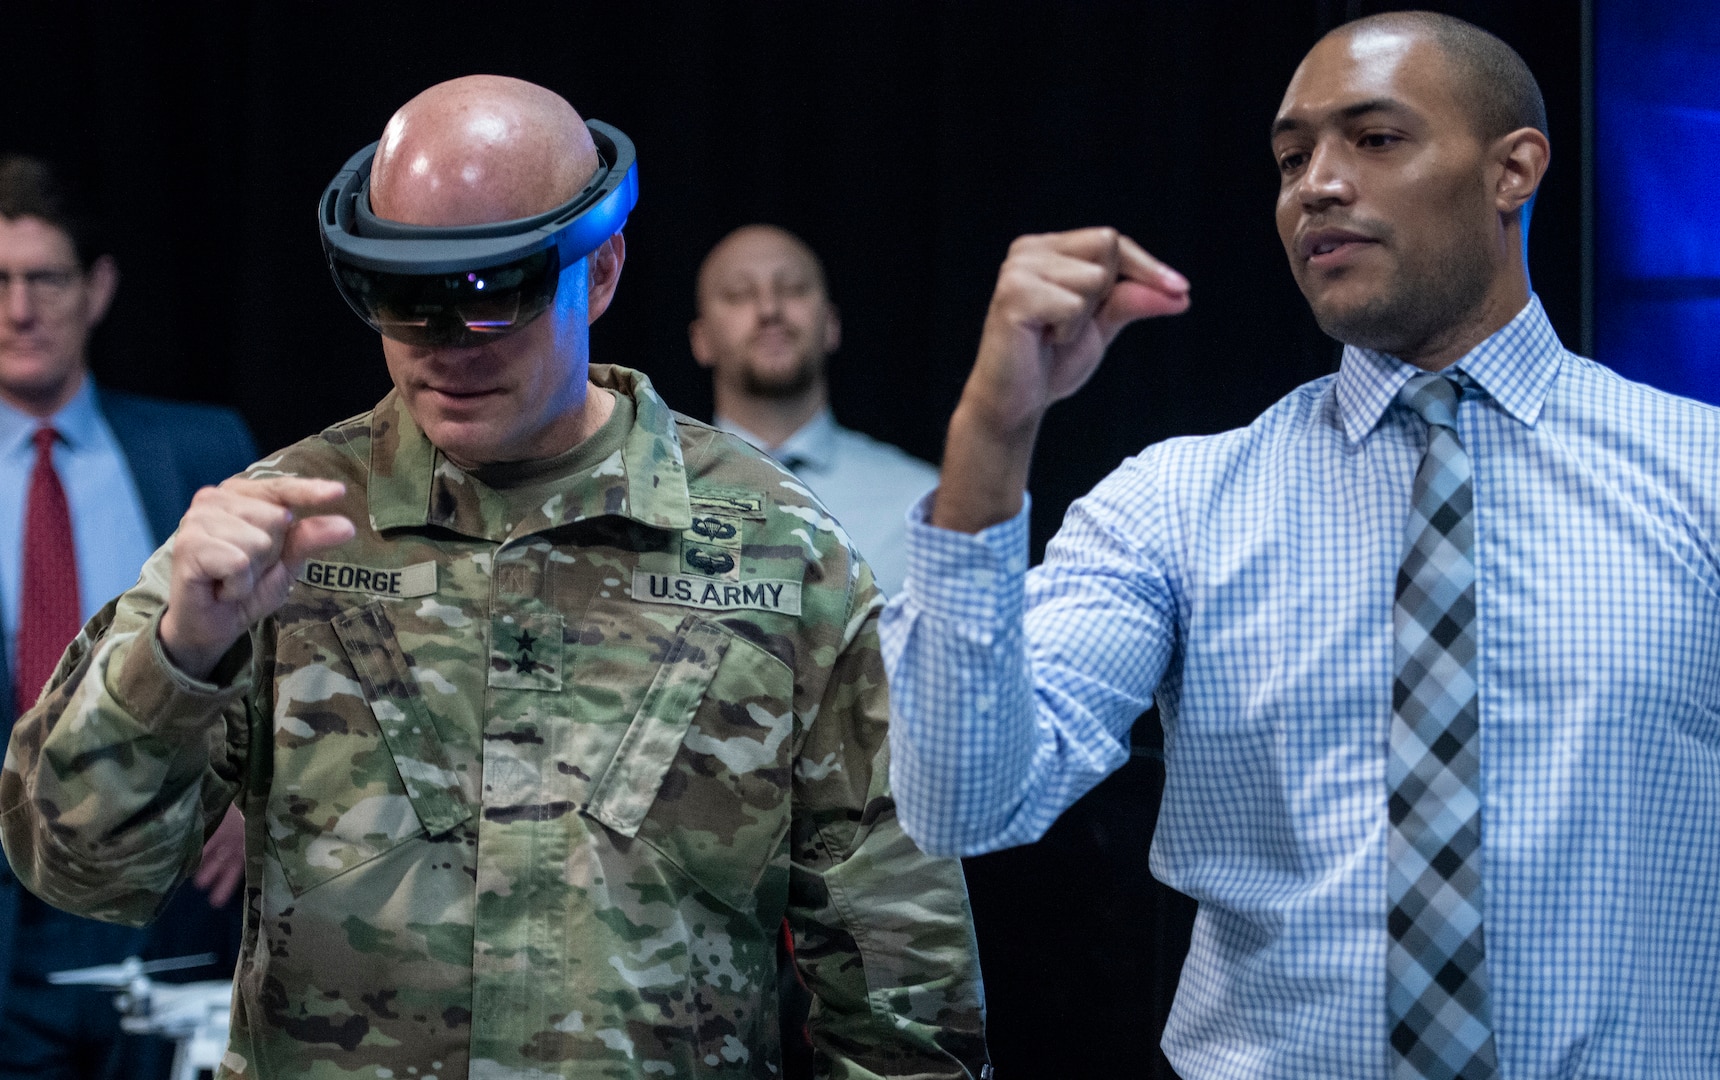 Austin Drexler, researcher at the Institute for Creative Technology in Los Angeles, helps Maj. Gen. John George use special interactive goggles to view One World Terrain 3D interactive simulation data. George is deputy director, Army Futures and Concepts Center.